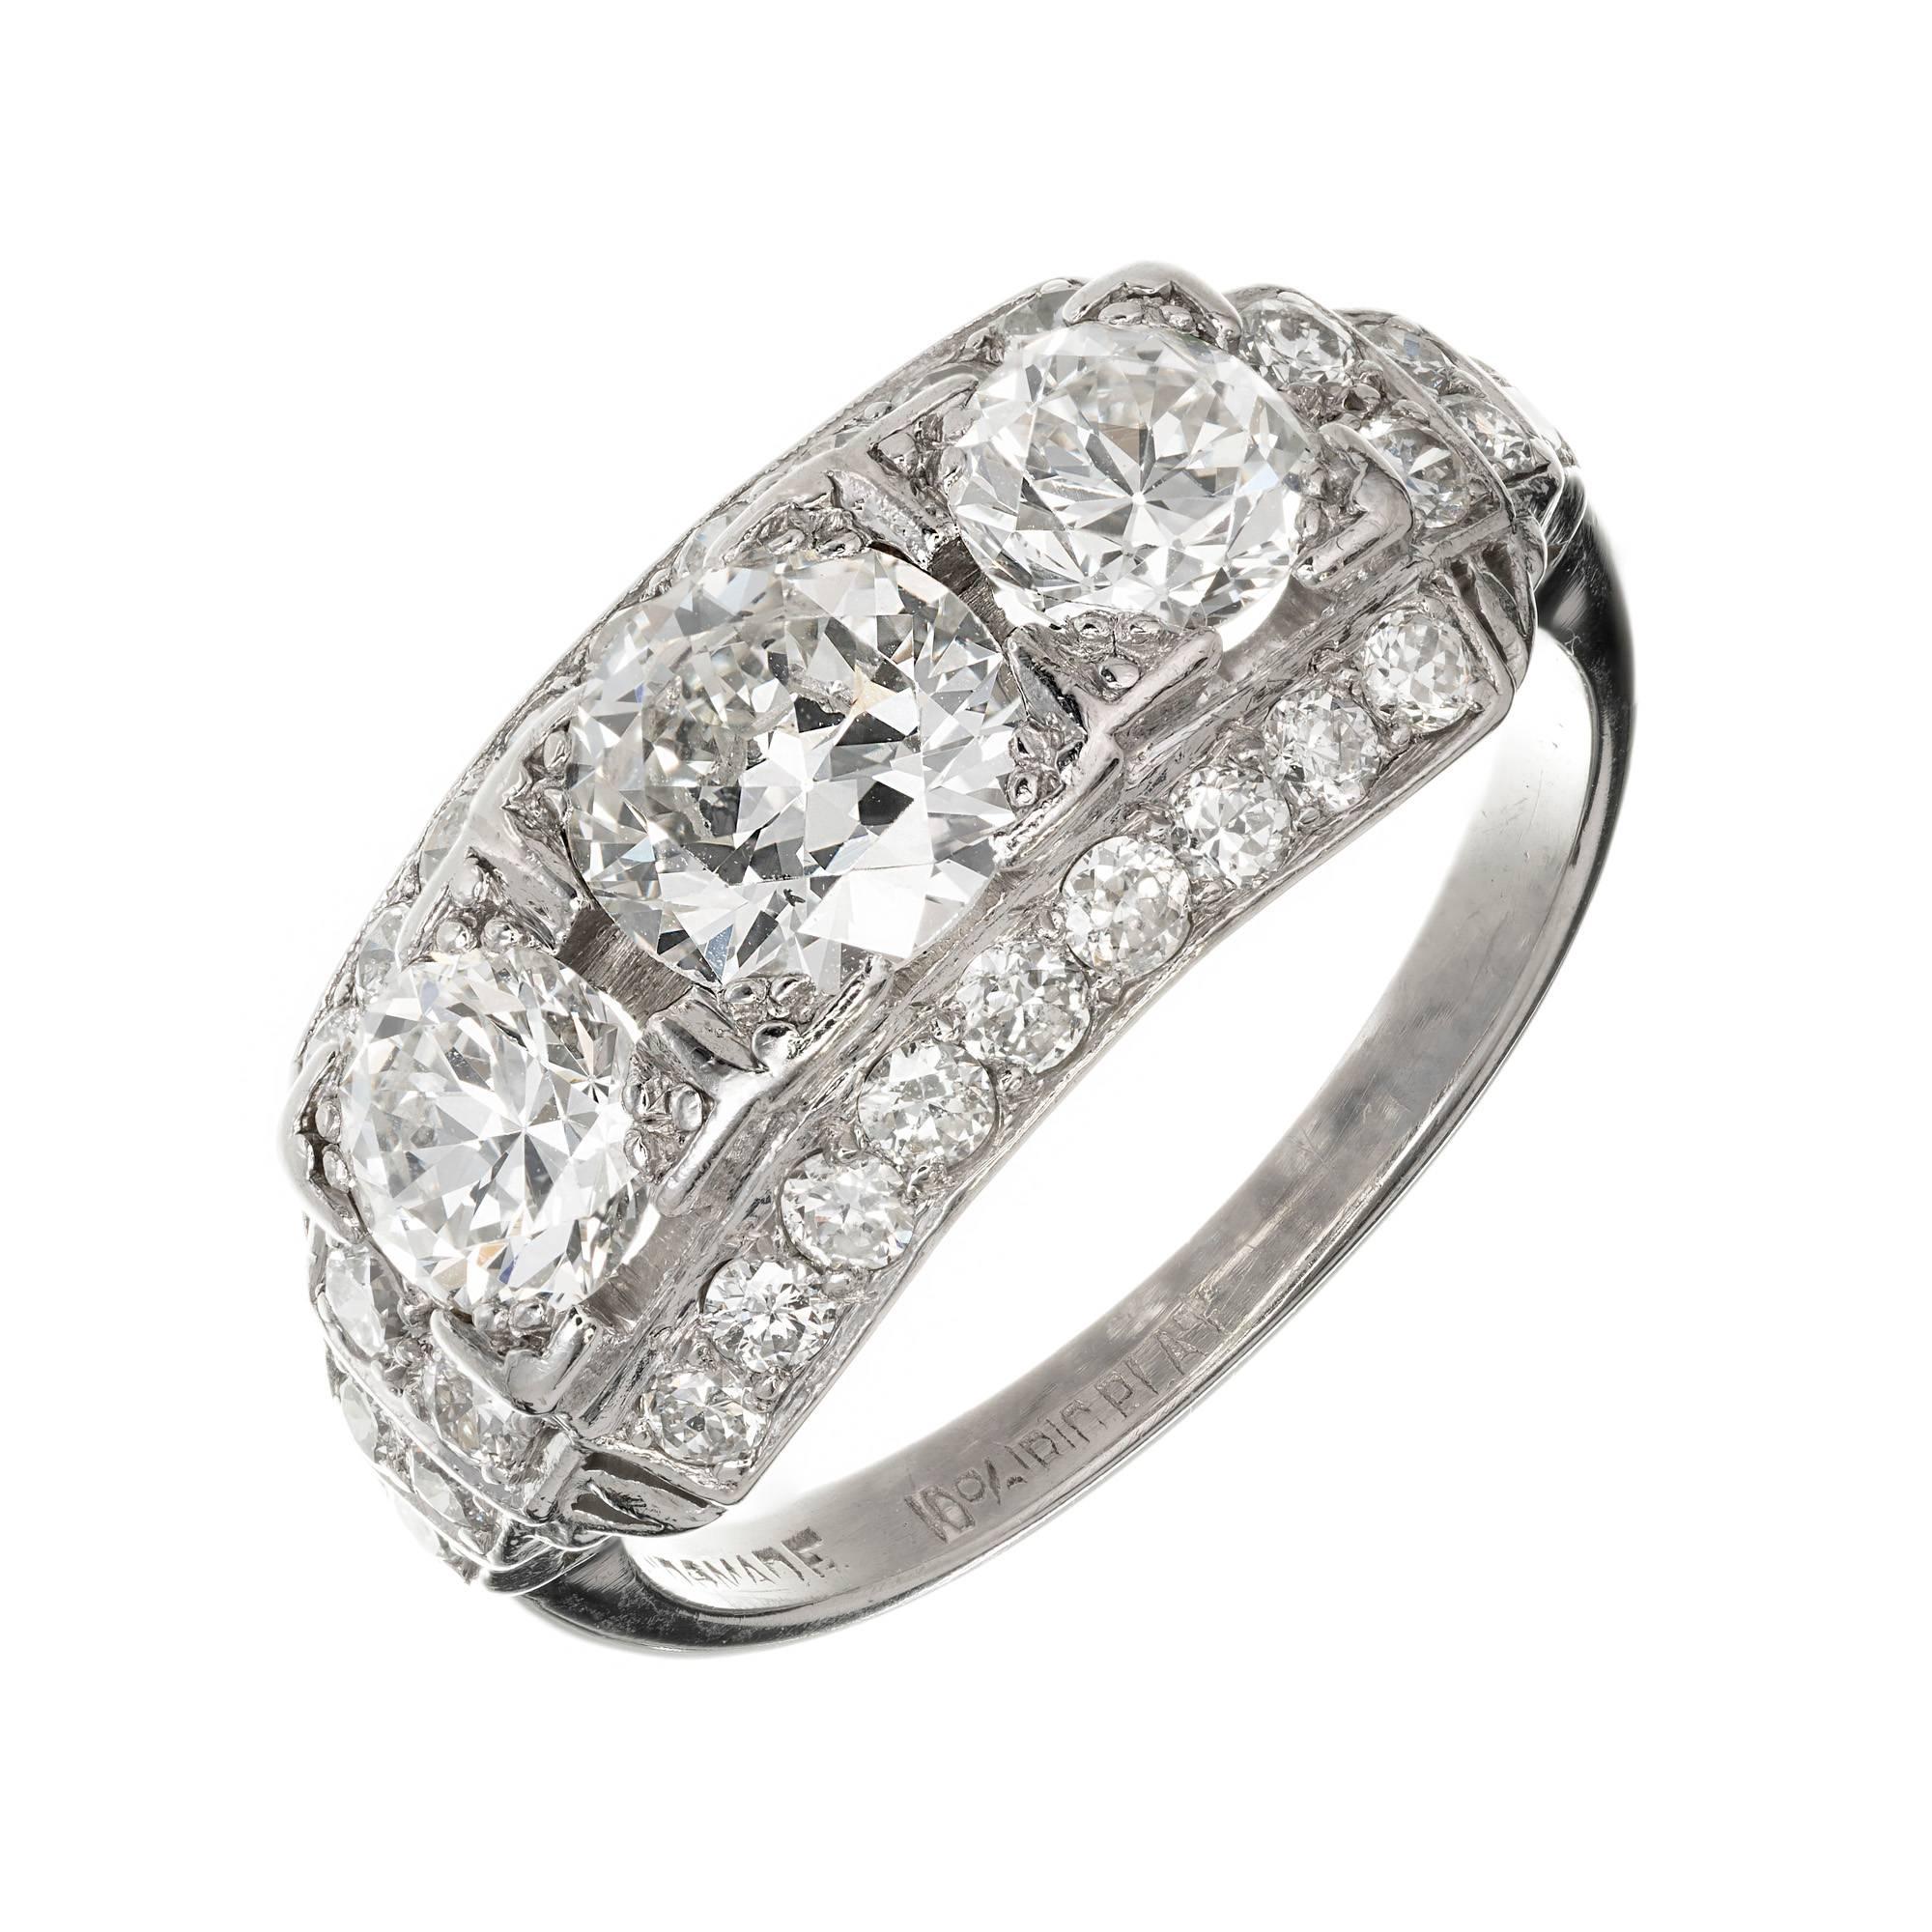 Art Deco 1930s three-stone Diamond ring with transitional cut bright sparkly Diamonds in a handmade Platinum setting. EGL certified.

1 transitional cut Diamond, approx. total weight .87cts, H – I, SI1, EGL certificate # US313879003D
2 transitional